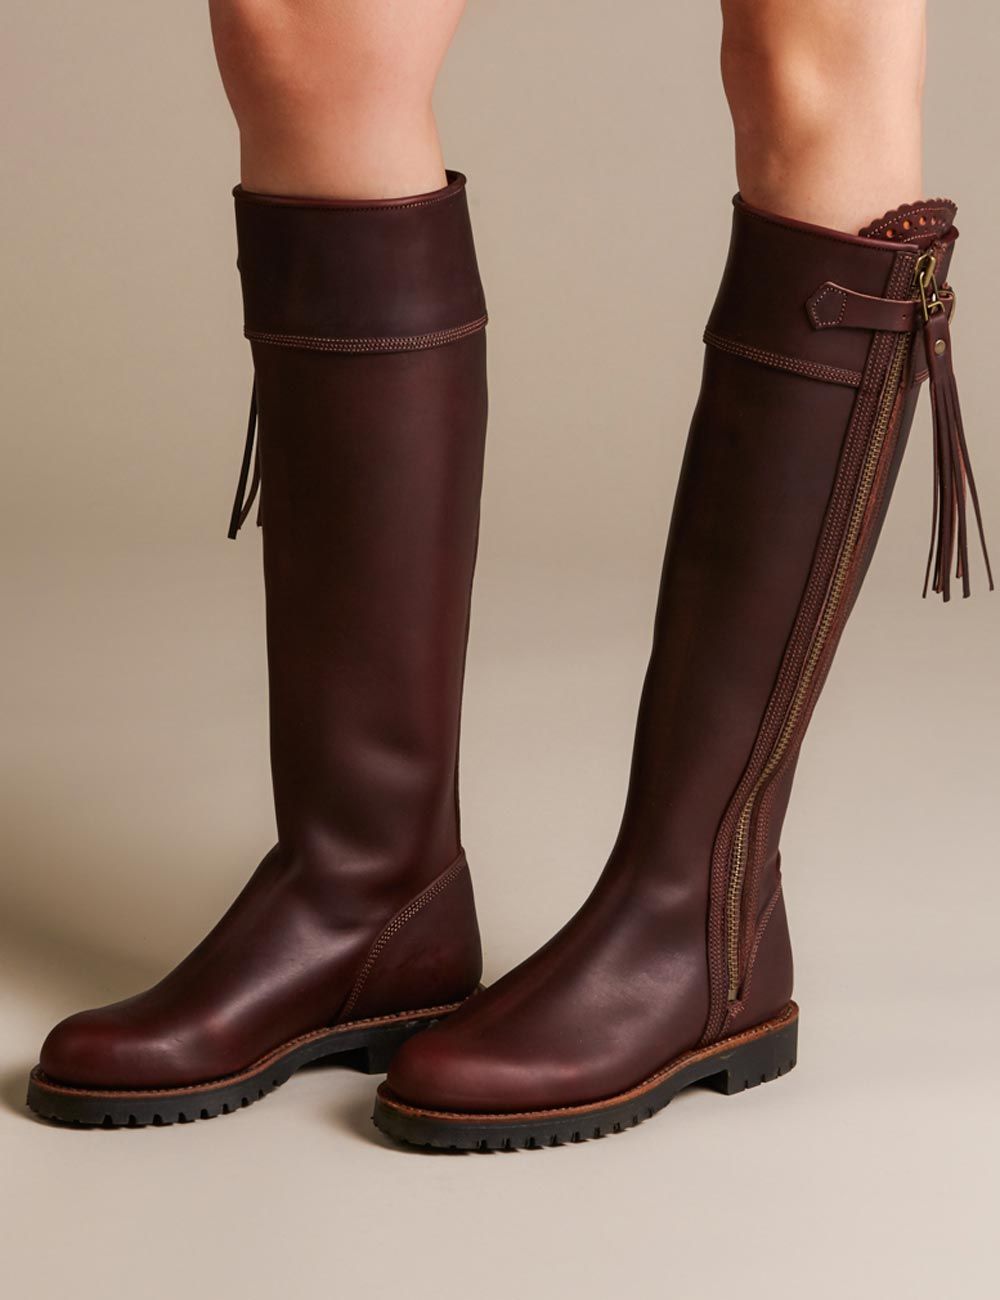 penelope chilvers tassel boots usa 